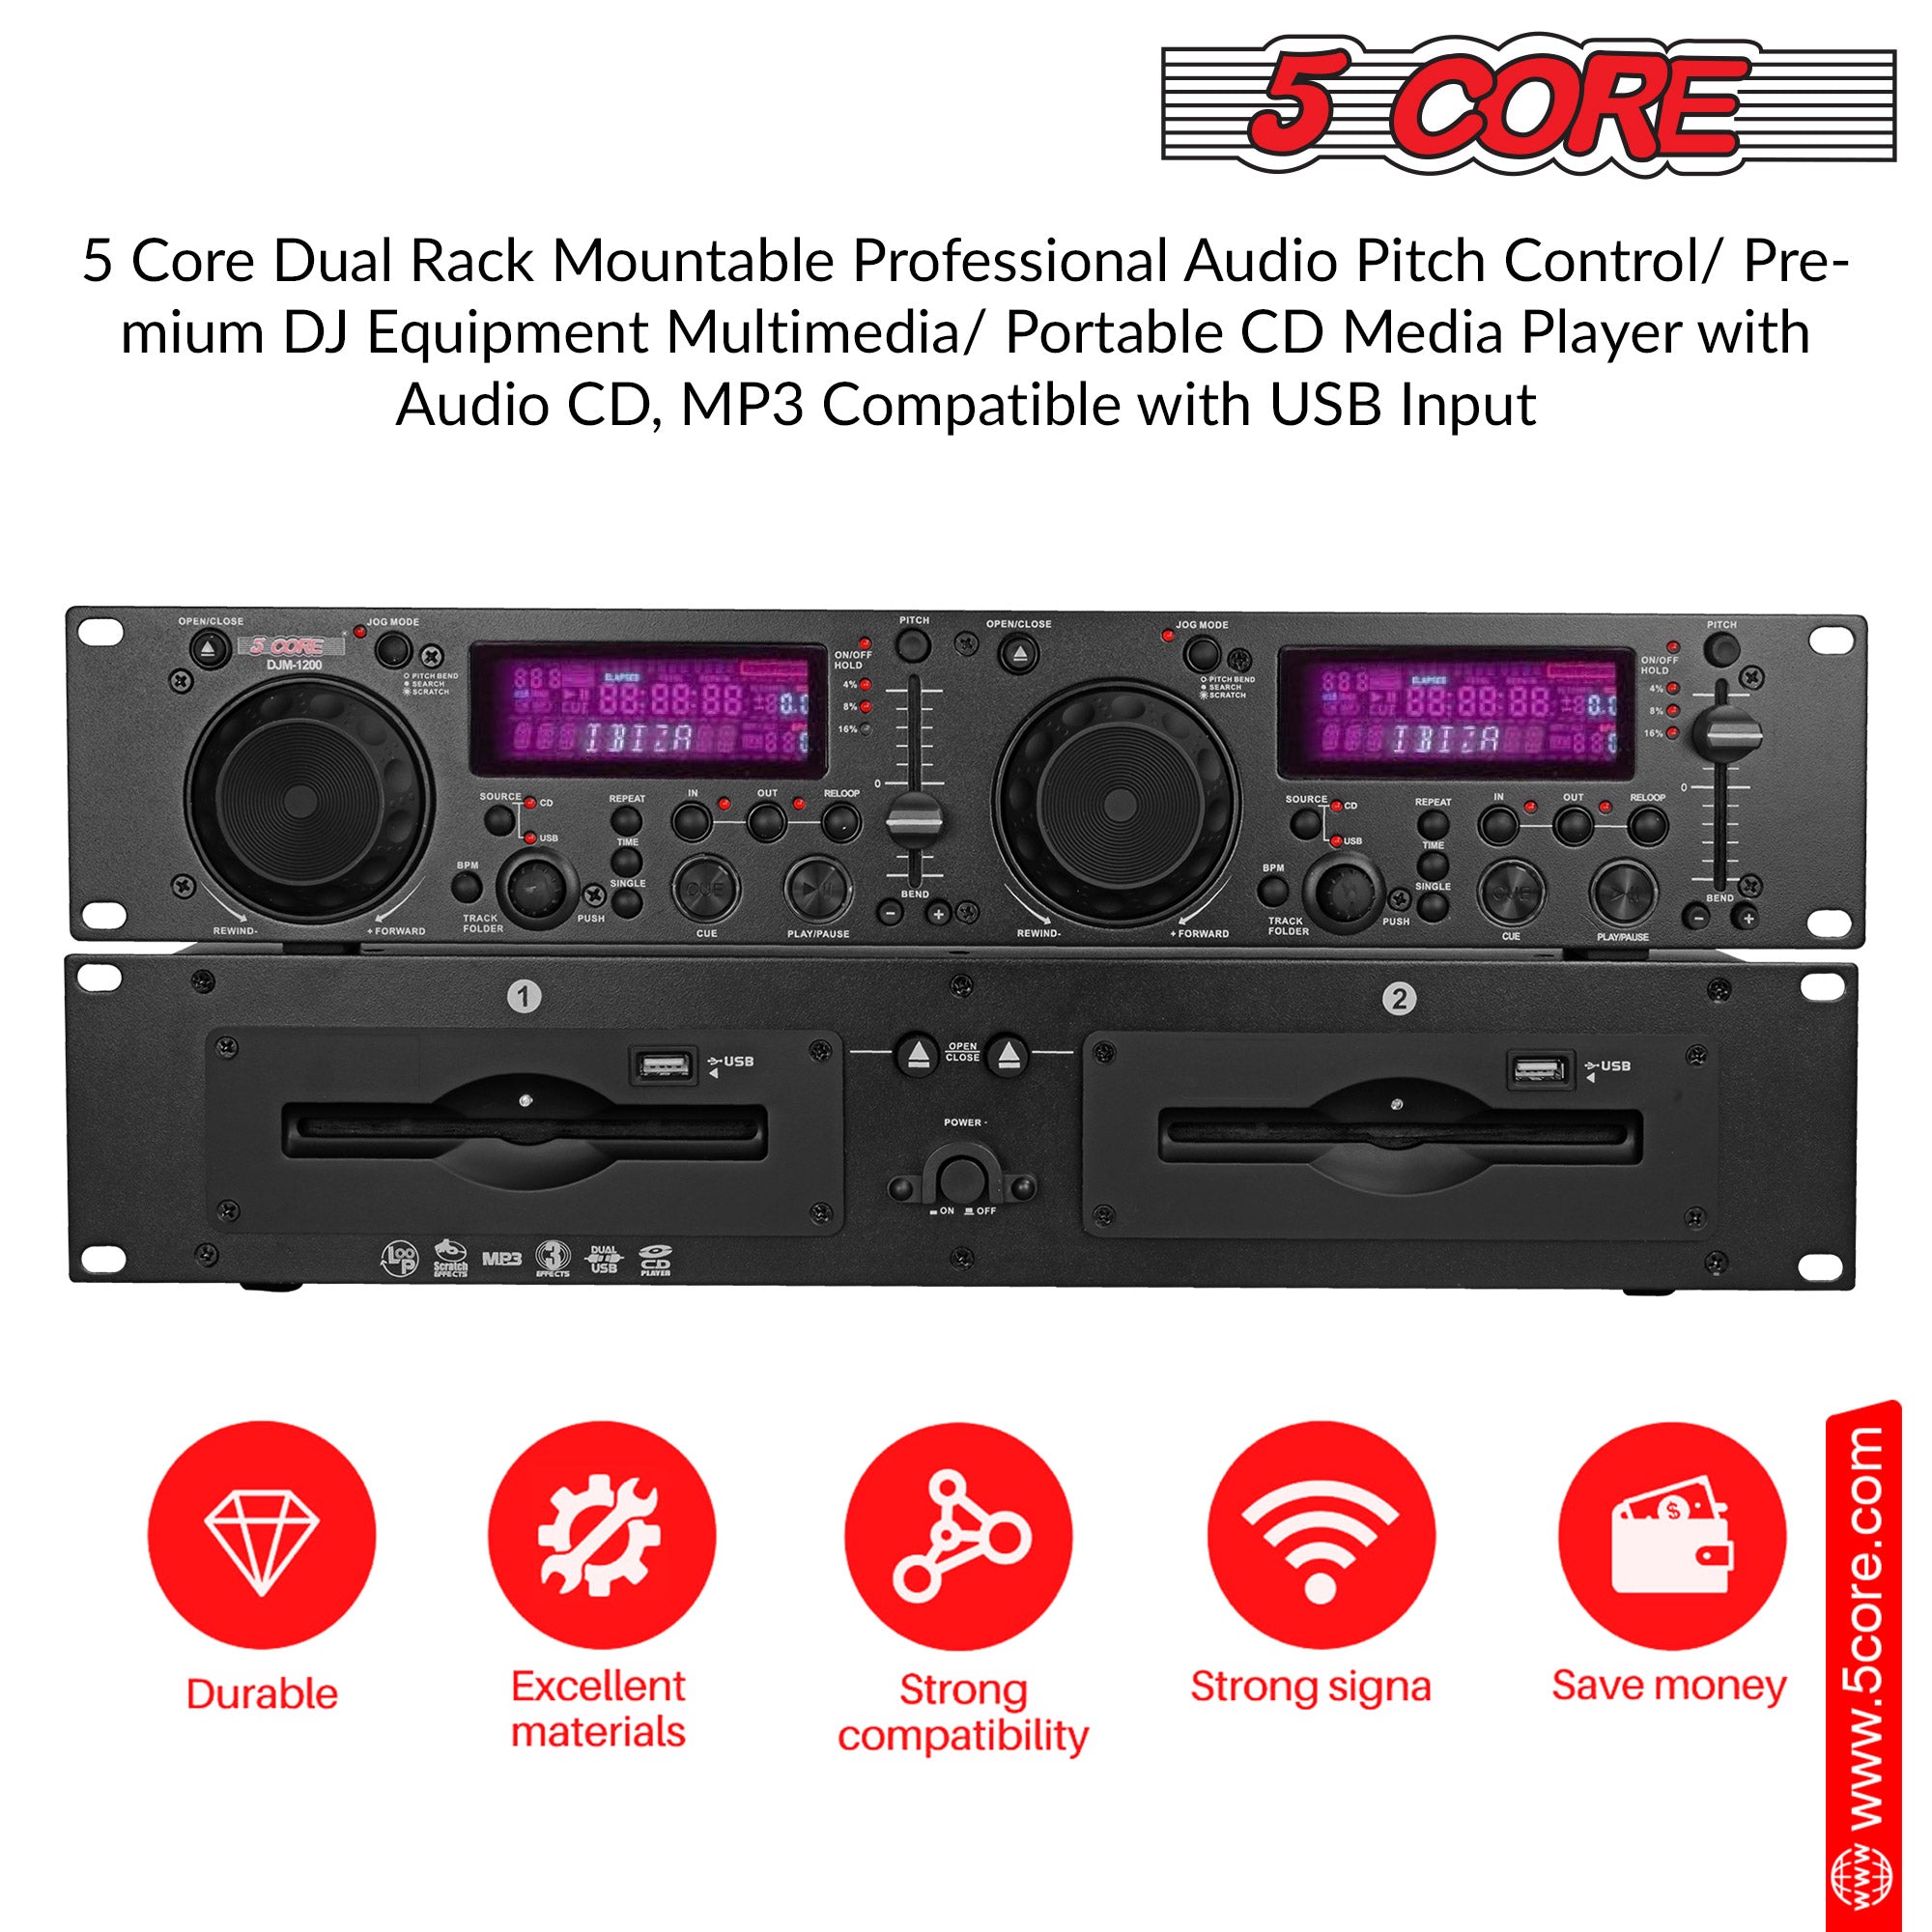 5 Core Professional Dual USB and MP3 CD Player Rack Mountable DJ Equipment with Audio Pitch Control Multimedia CD R and MP3 Compatible- DJM 1200